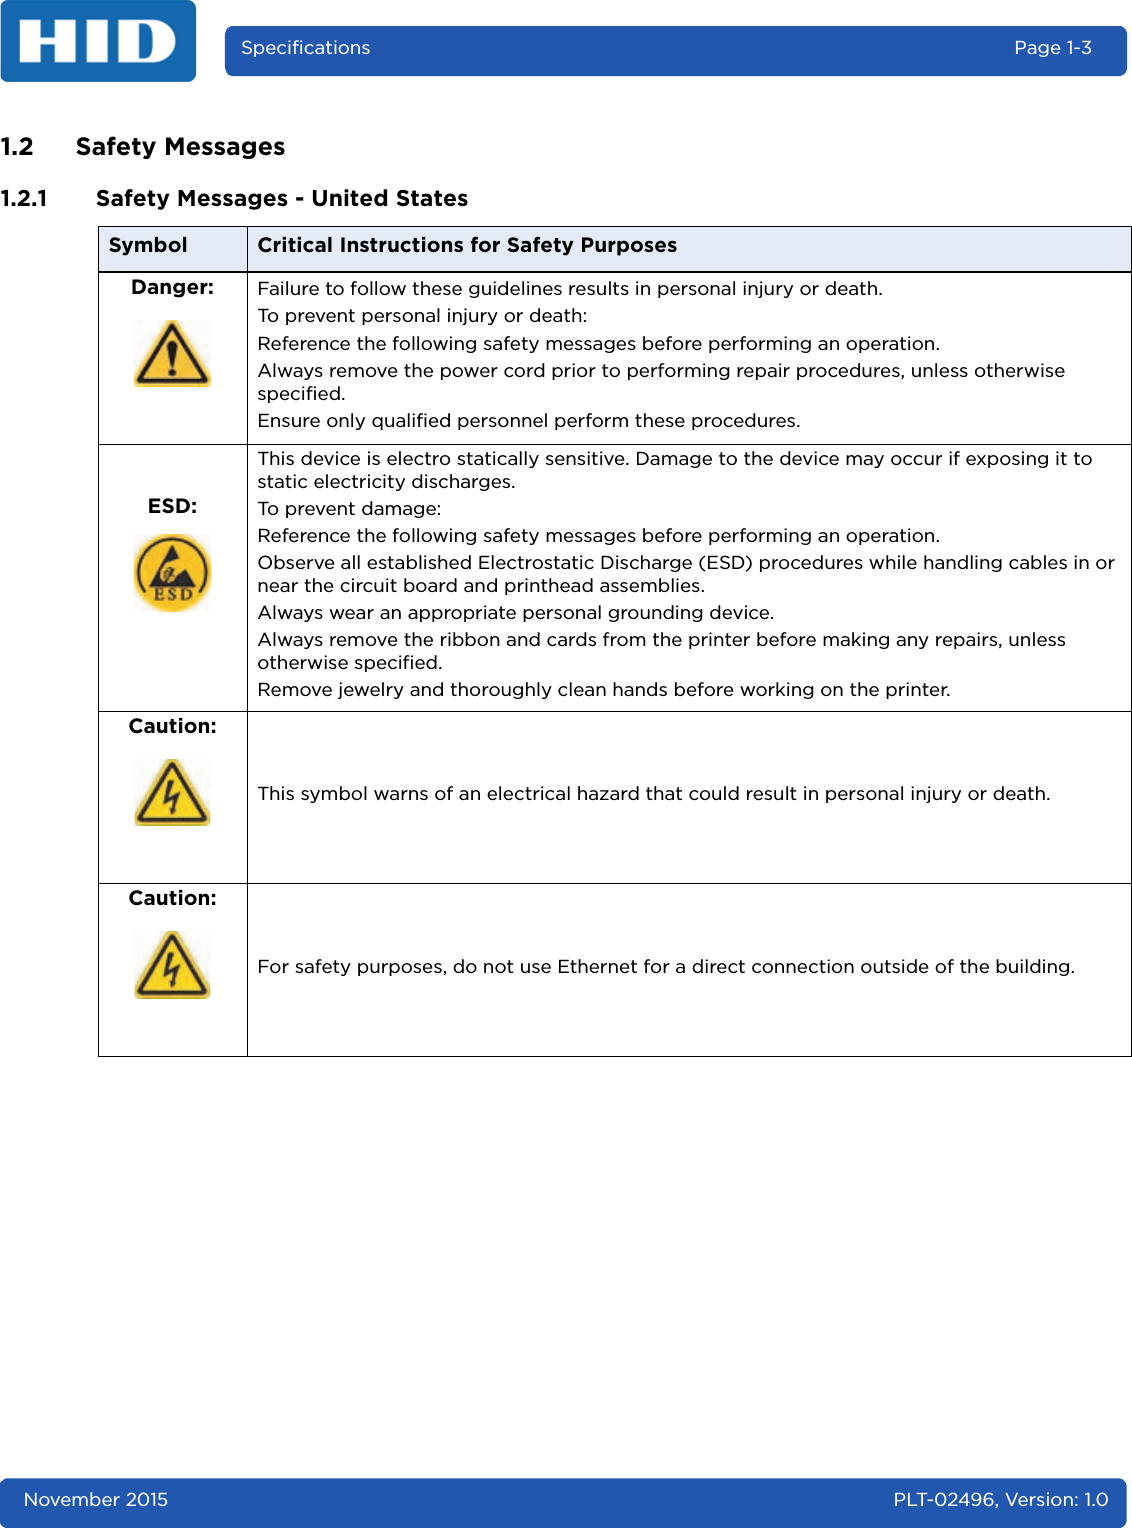 November 2015 PLT-02496, Version: 1.0Specifications Page 1-31.2 Safety Messages1.2.1 Safety Messages - United StatesSymbol Critical Instructions for Safety PurposesDanger: Failure to follow these guidelines results in personal injury or death. To prevent personal injury or death:Reference the following safety messages before performing an operation. Always remove the power cord prior to performing repair procedures, unless otherwise specified. Ensure only qualified personnel perform these procedures.ESD:This device is electro statically sensitive. Damage to the device may occur if exposing it to static electricity discharges. To prevent damage:Reference the following safety messages before performing an operation.Observe all established Electrostatic Discharge (ESD) procedures while handling cables in or near the circuit board and printhead assemblies. Always wear an appropriate personal grounding device.Always remove the ribbon and cards from the printer before making any repairs, unless otherwise specified. Remove jewelry and thoroughly clean hands before working on the printer.Caution:This symbol warns of an electrical hazard that could result in personal injury or death.Caution:For safety purposes, do not use Ethernet for a direct connection outside of the building.